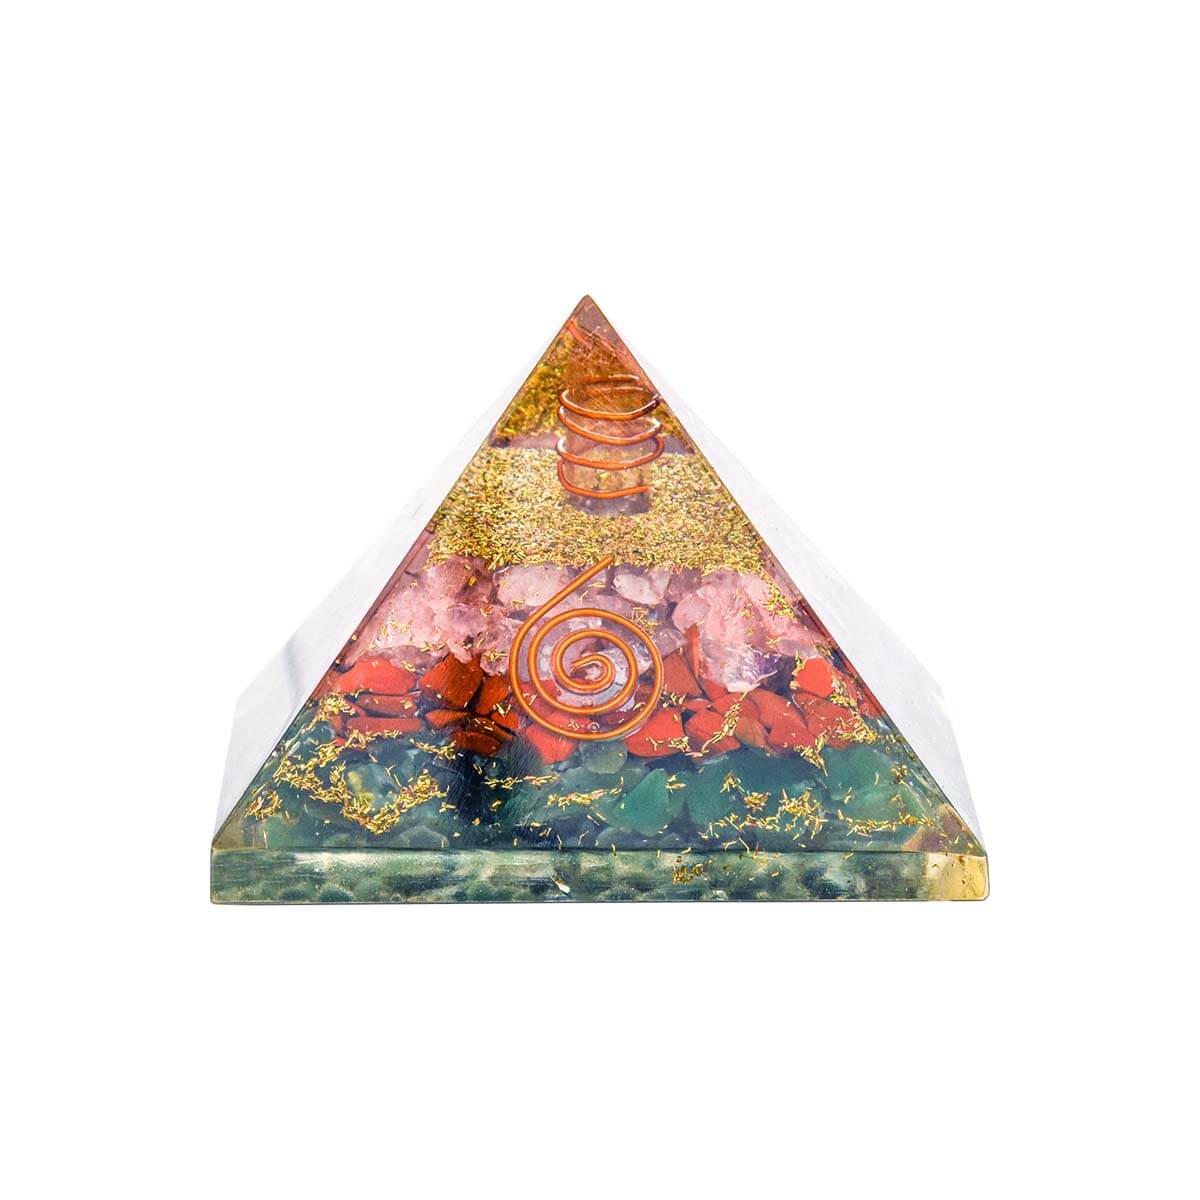 Pre Energized Natural Stablity & Growth in Relationship Pyramid Made of Natural Crystal for Stability, Healthy & Growth in Love, Marriage Relationship. Feng Shui Remedy